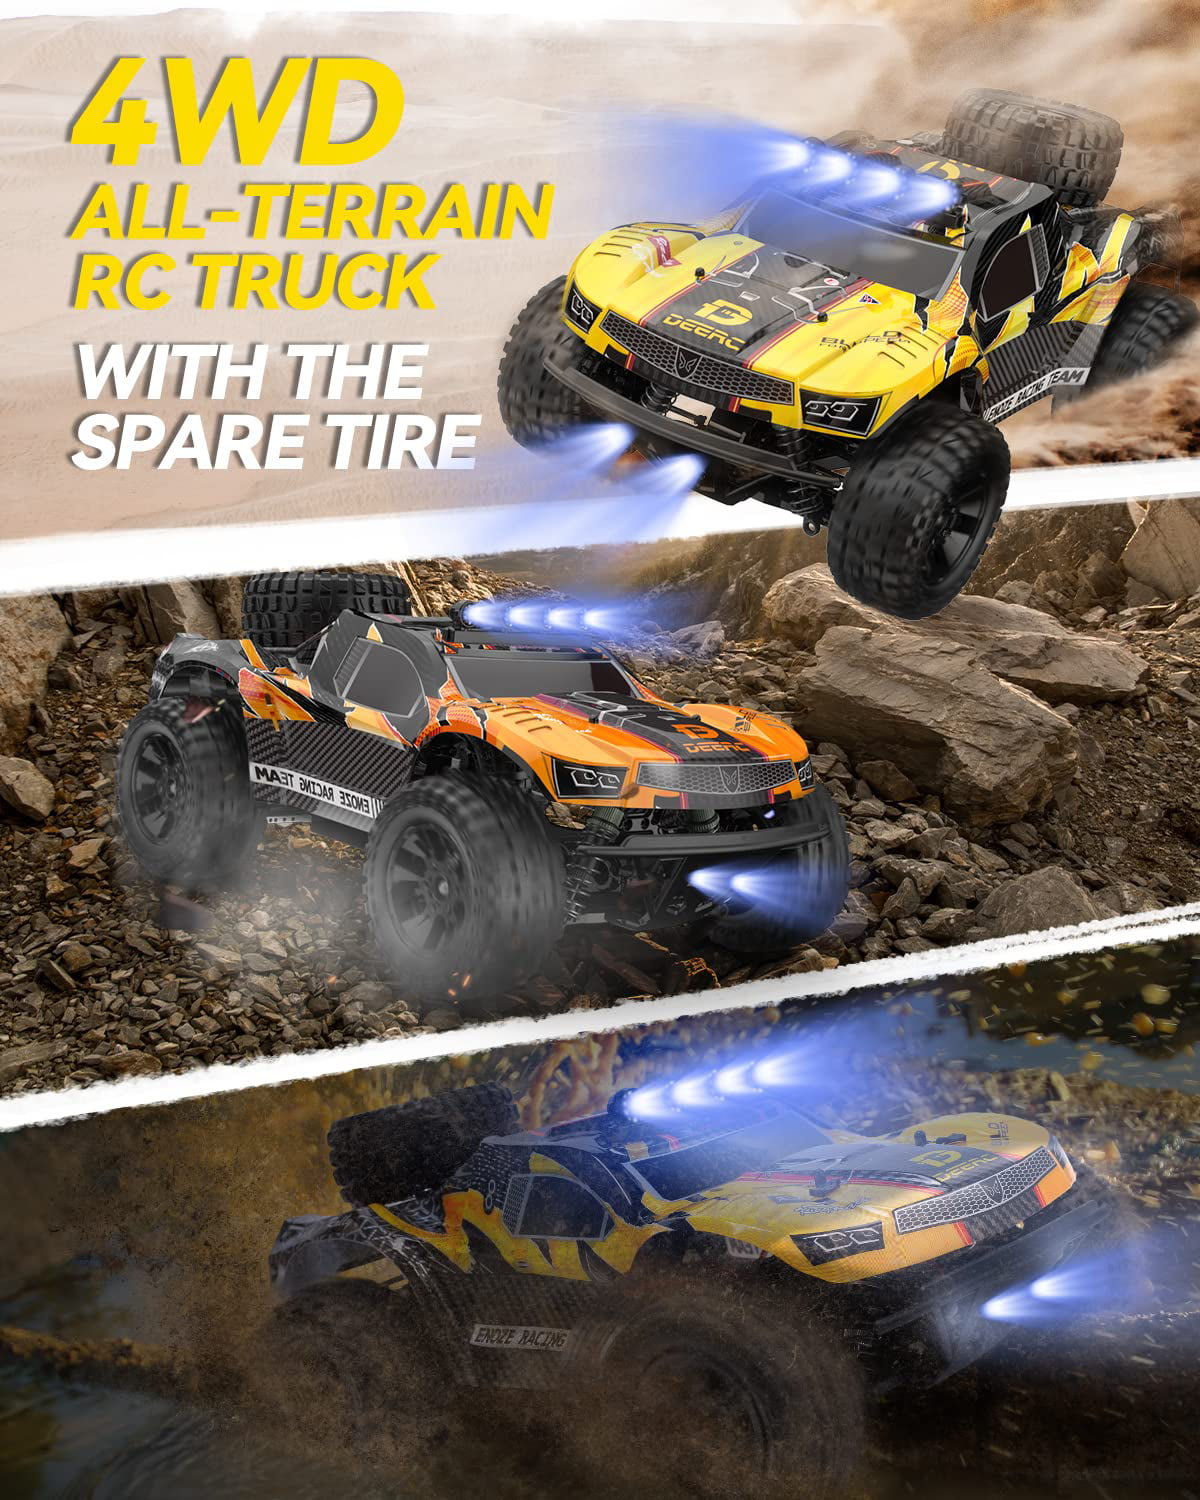 DEERC 1:10 Large Scale RC Car 9201E 4WD 48 km/h High Speed Remote